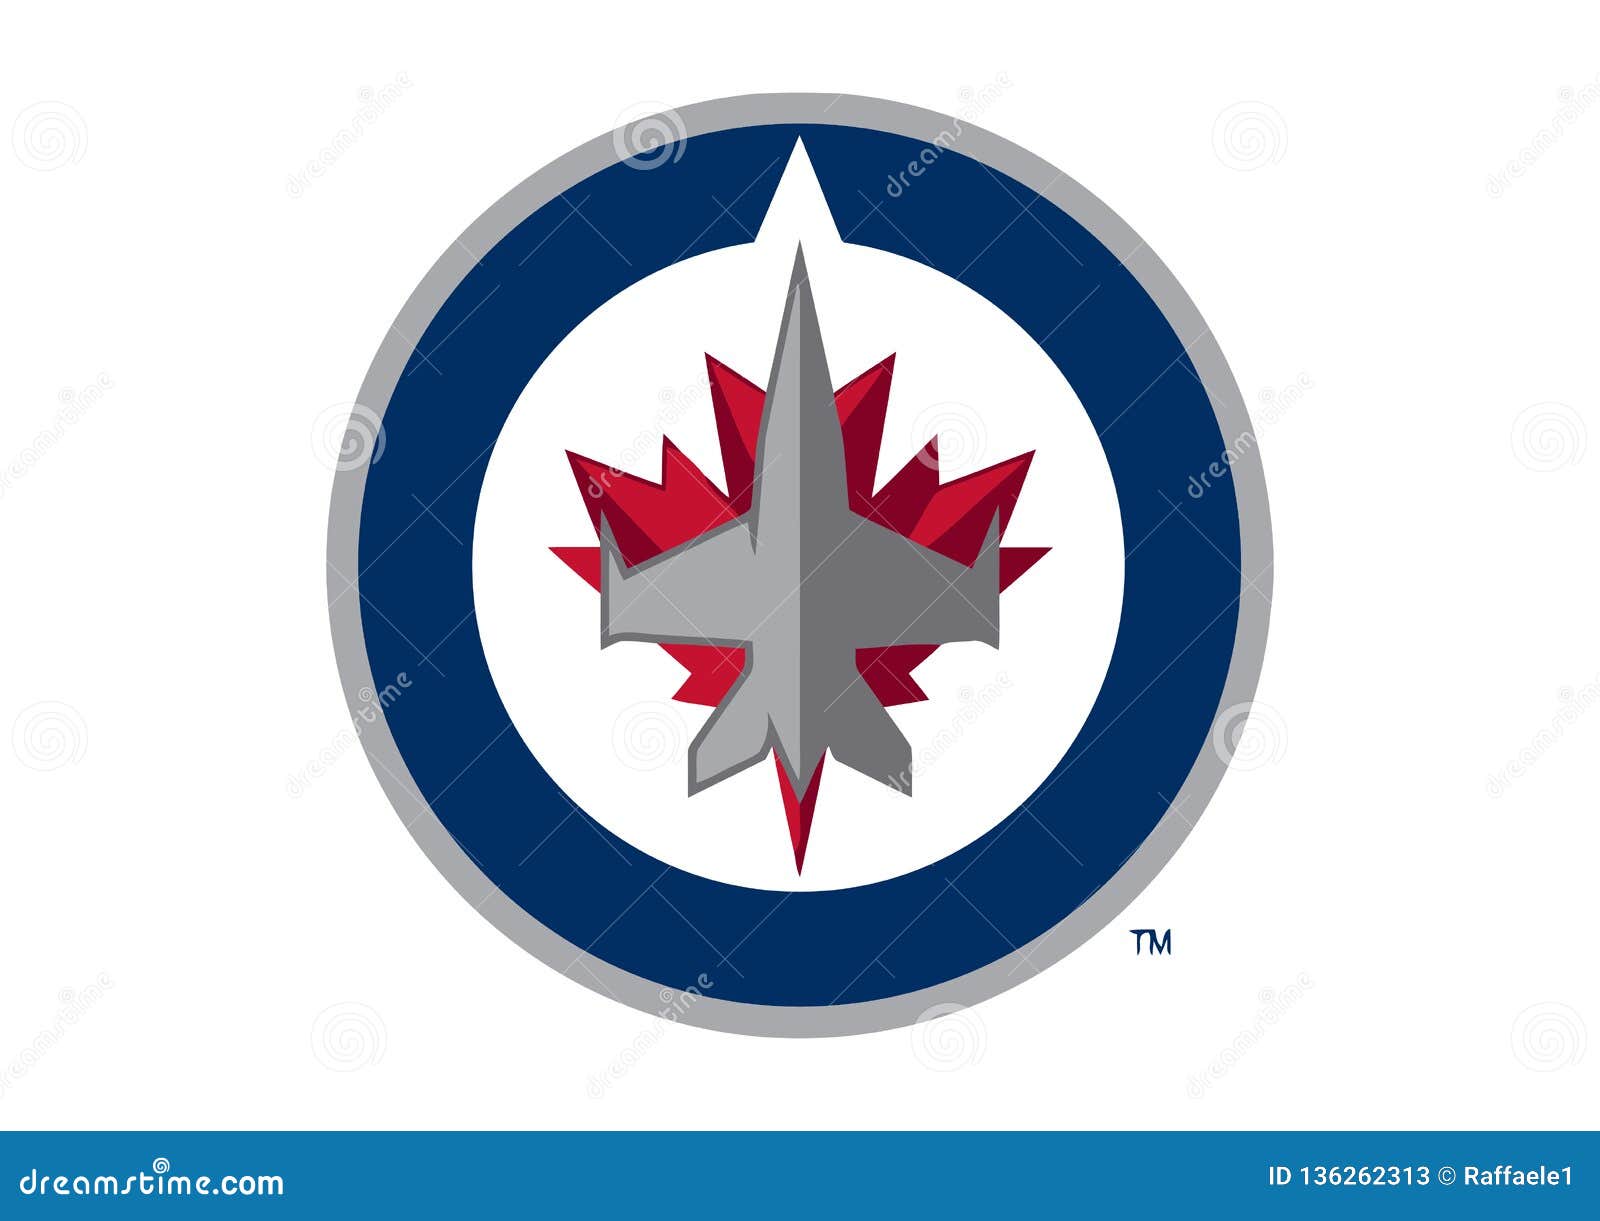 Winnipeg Jets Projects  Photos, videos, logos, illustrations and